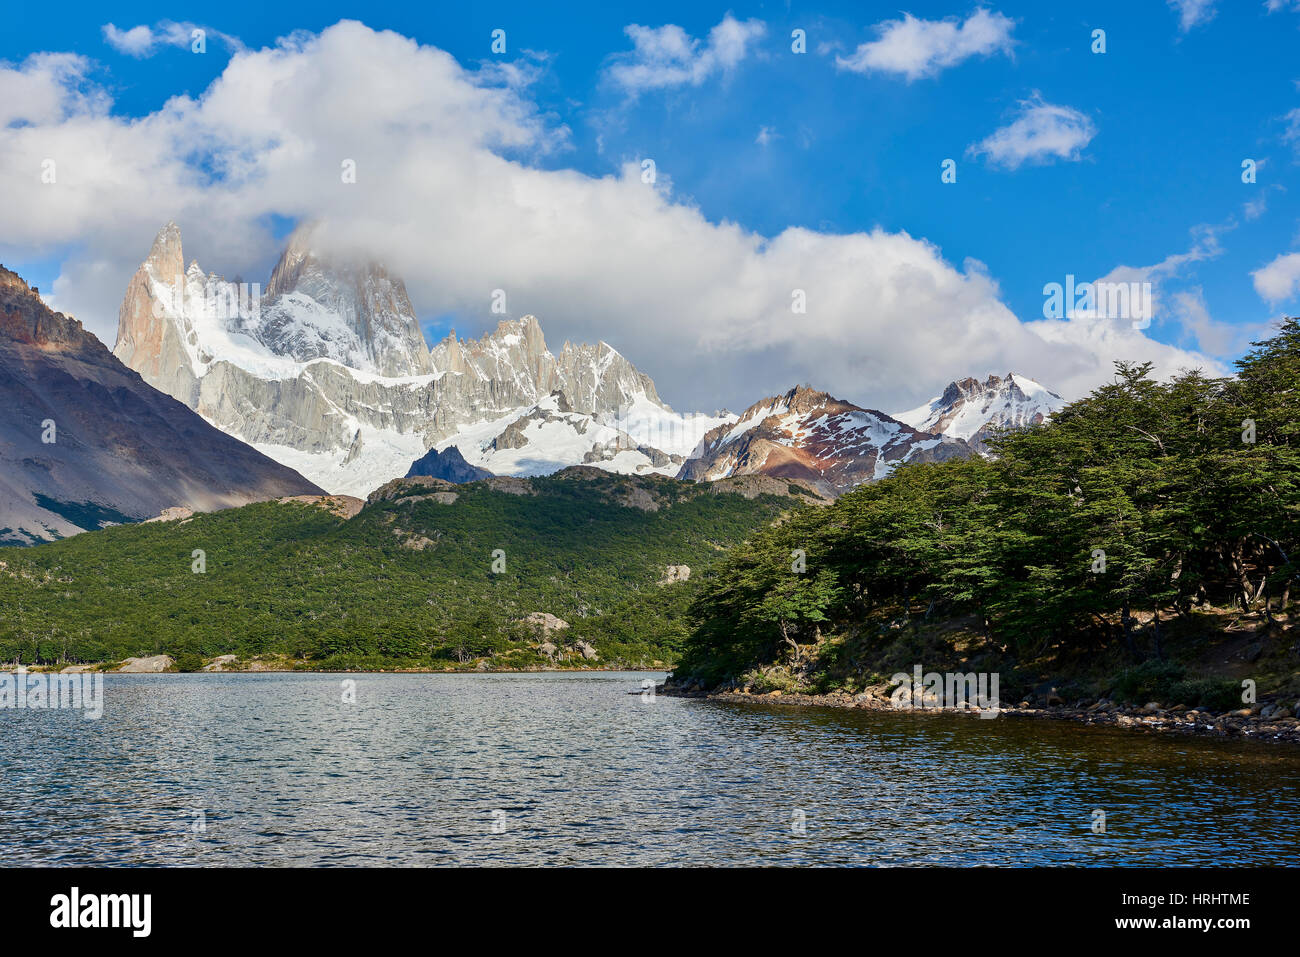 Capri Lagoon with Monte Fitz Roy in the background, Patagonia, Argentina Stock Photo